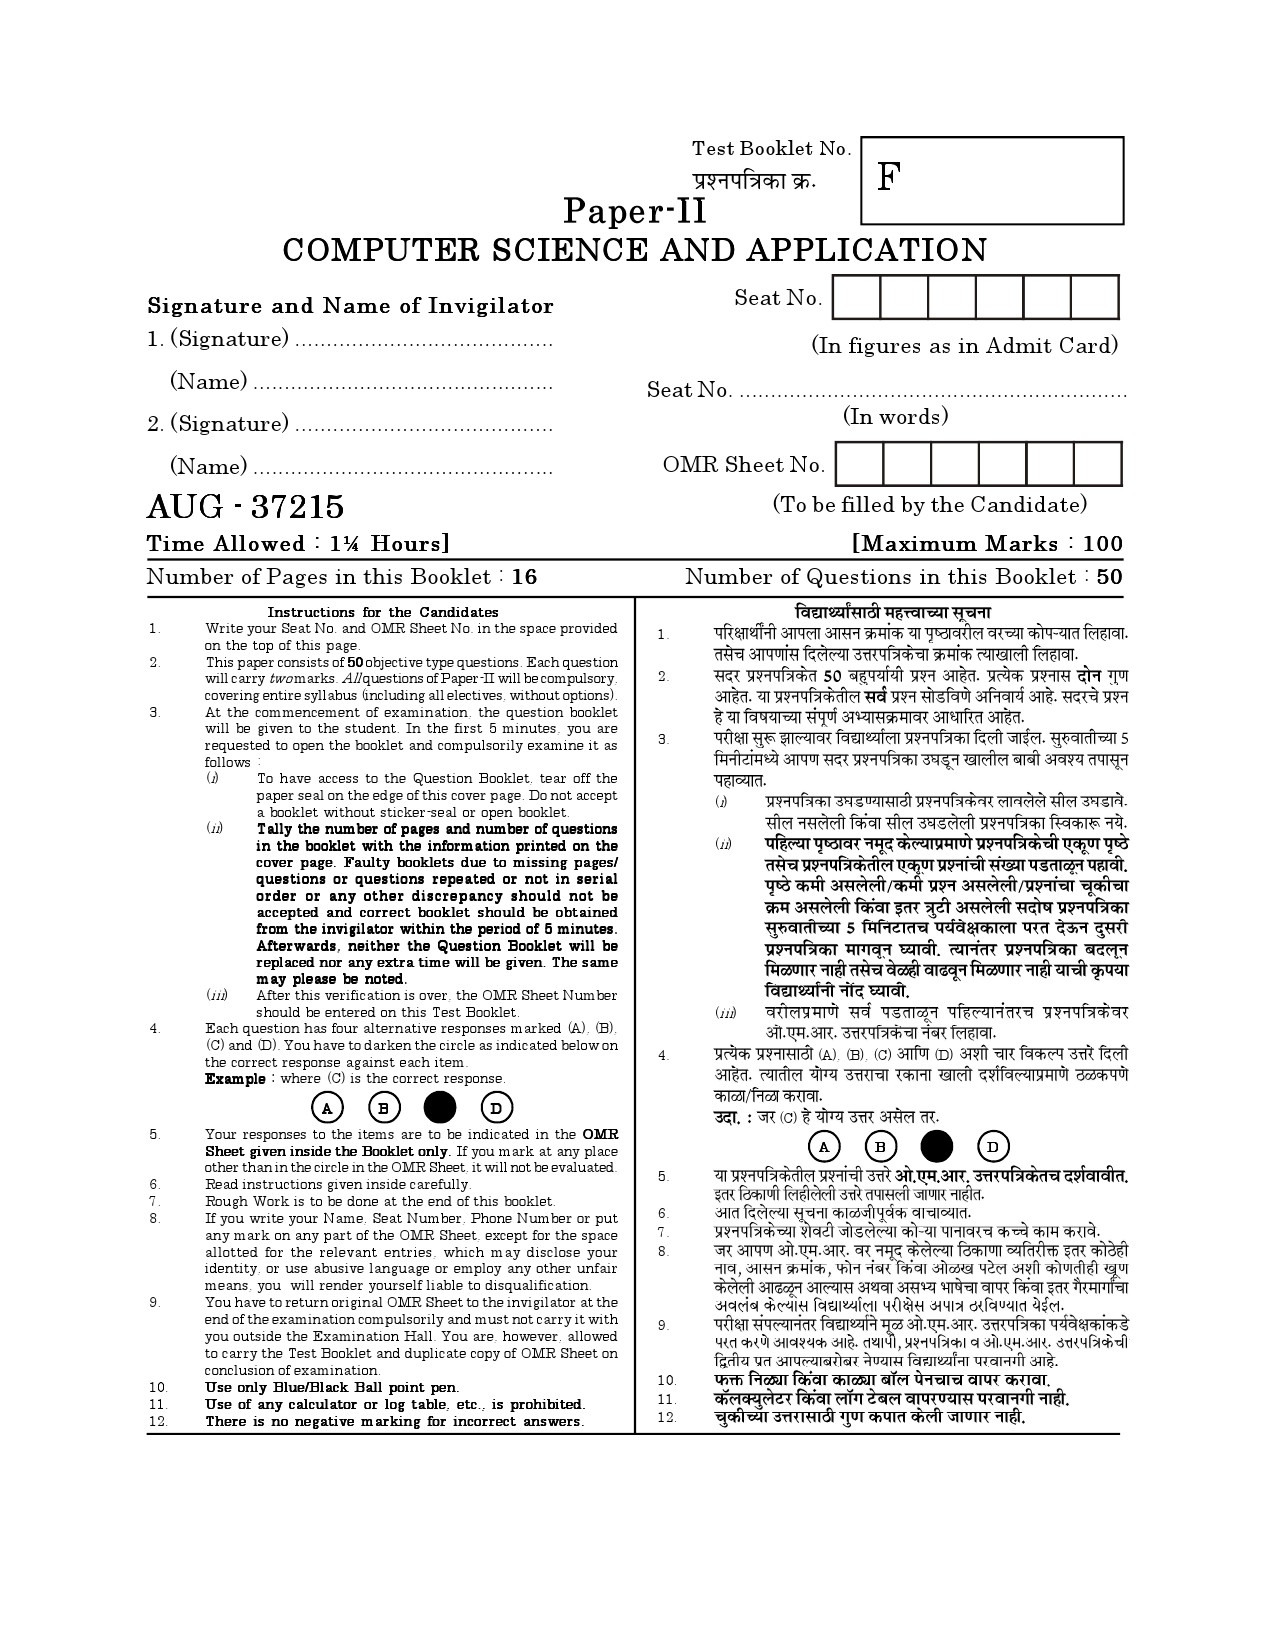 Maharashtra SET Computer Science and Application Question Paper II August 2015 1